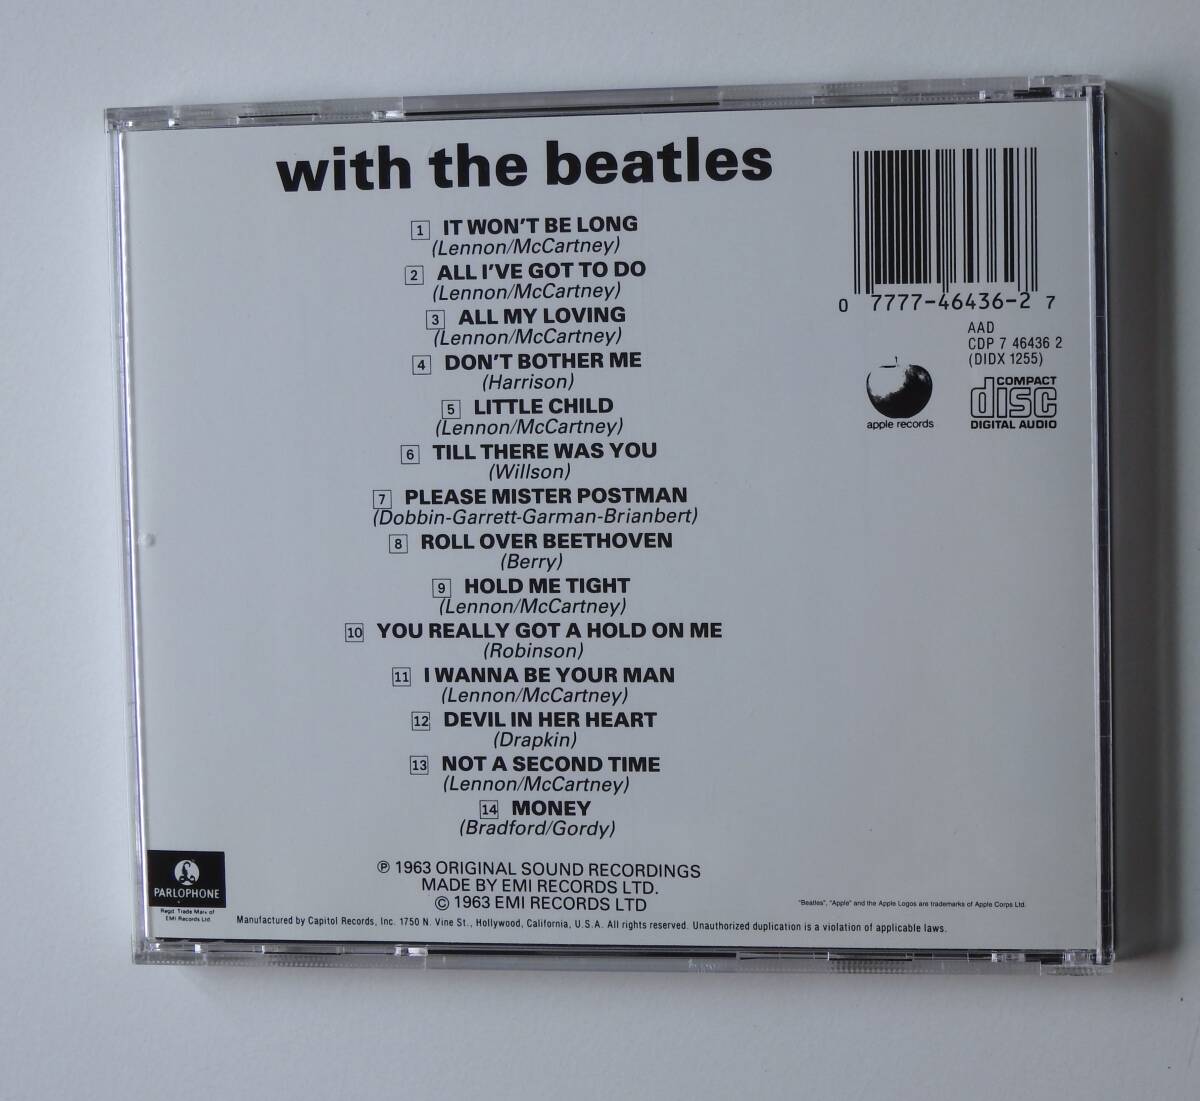 The Beatles / With the Beatles 　USA盤　 新品同様美品　即決価格にて_画像2